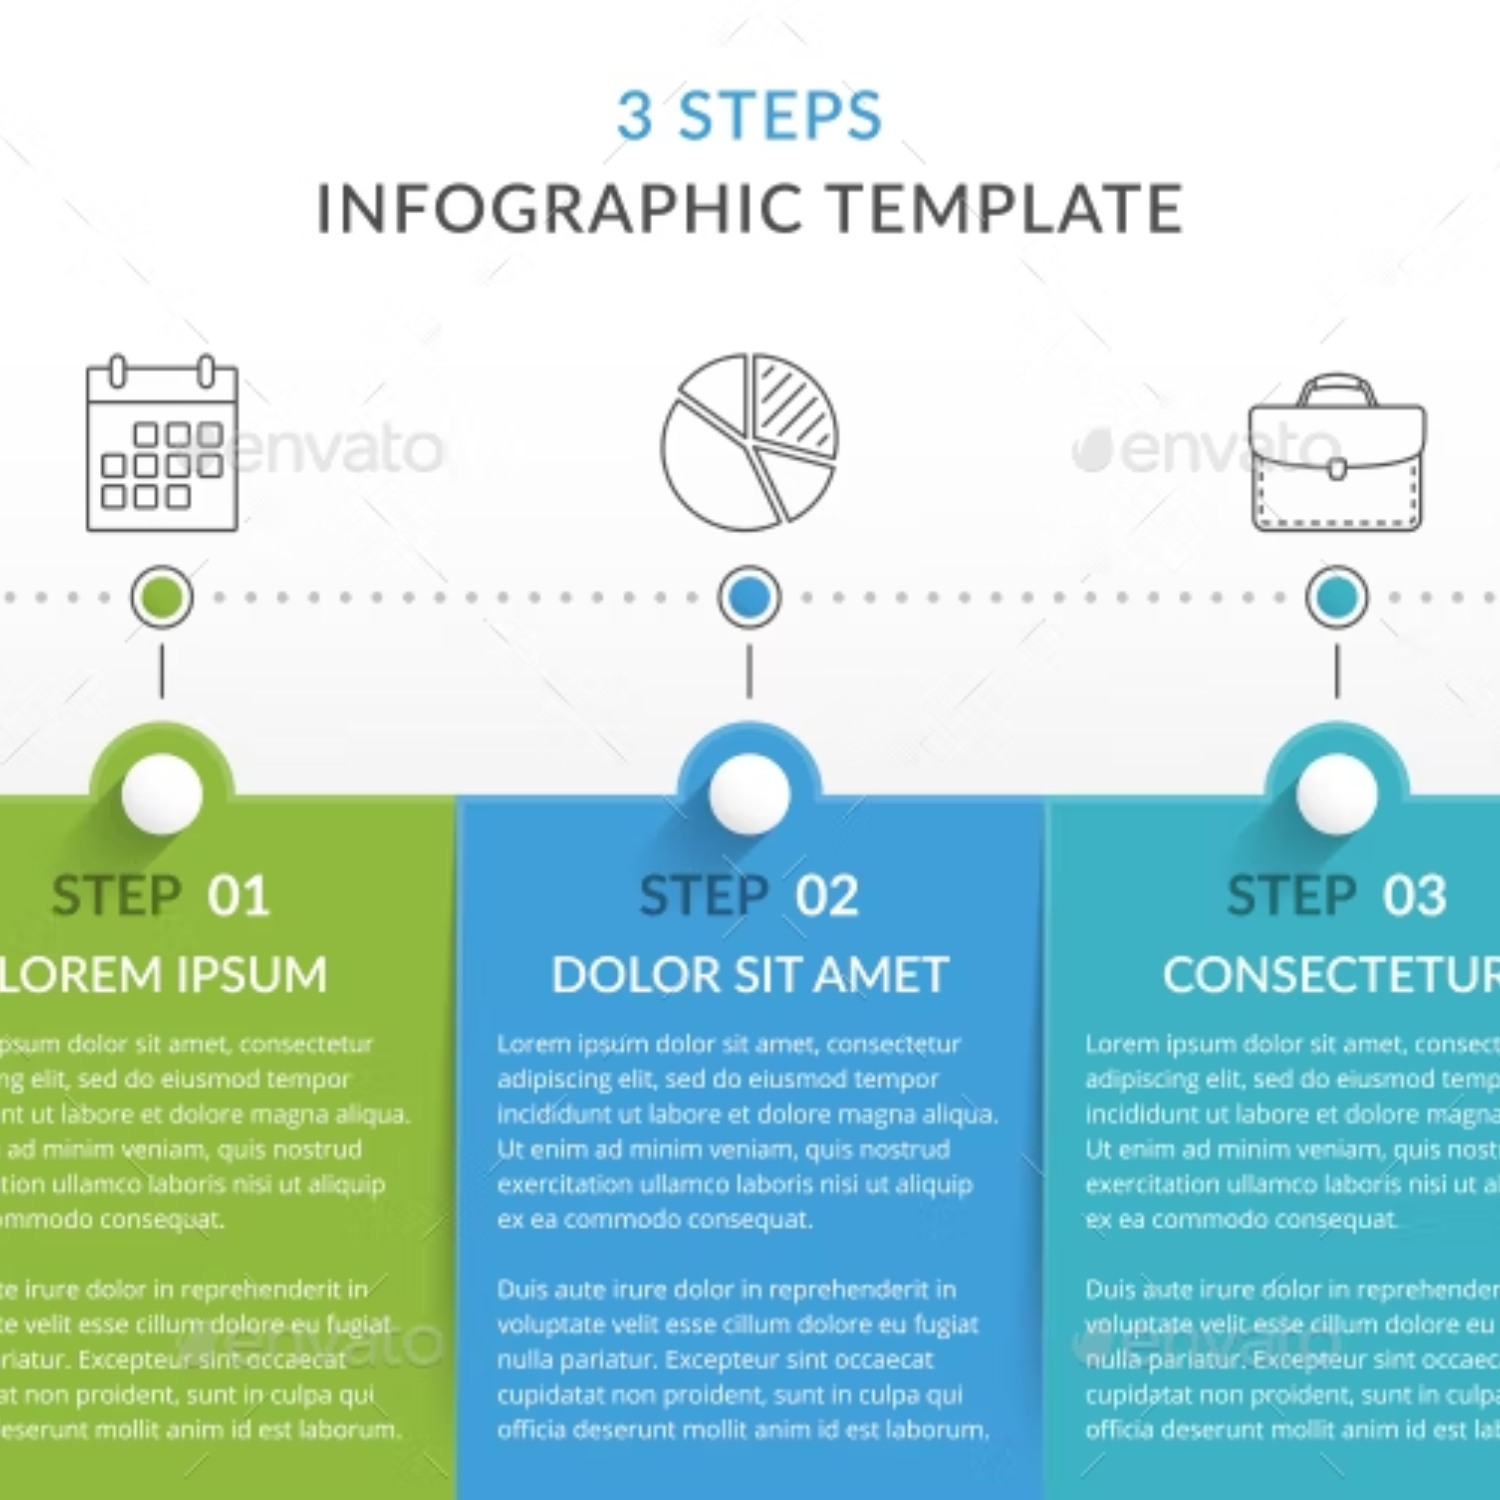 3 Steps - Infographic Template Main Cover.